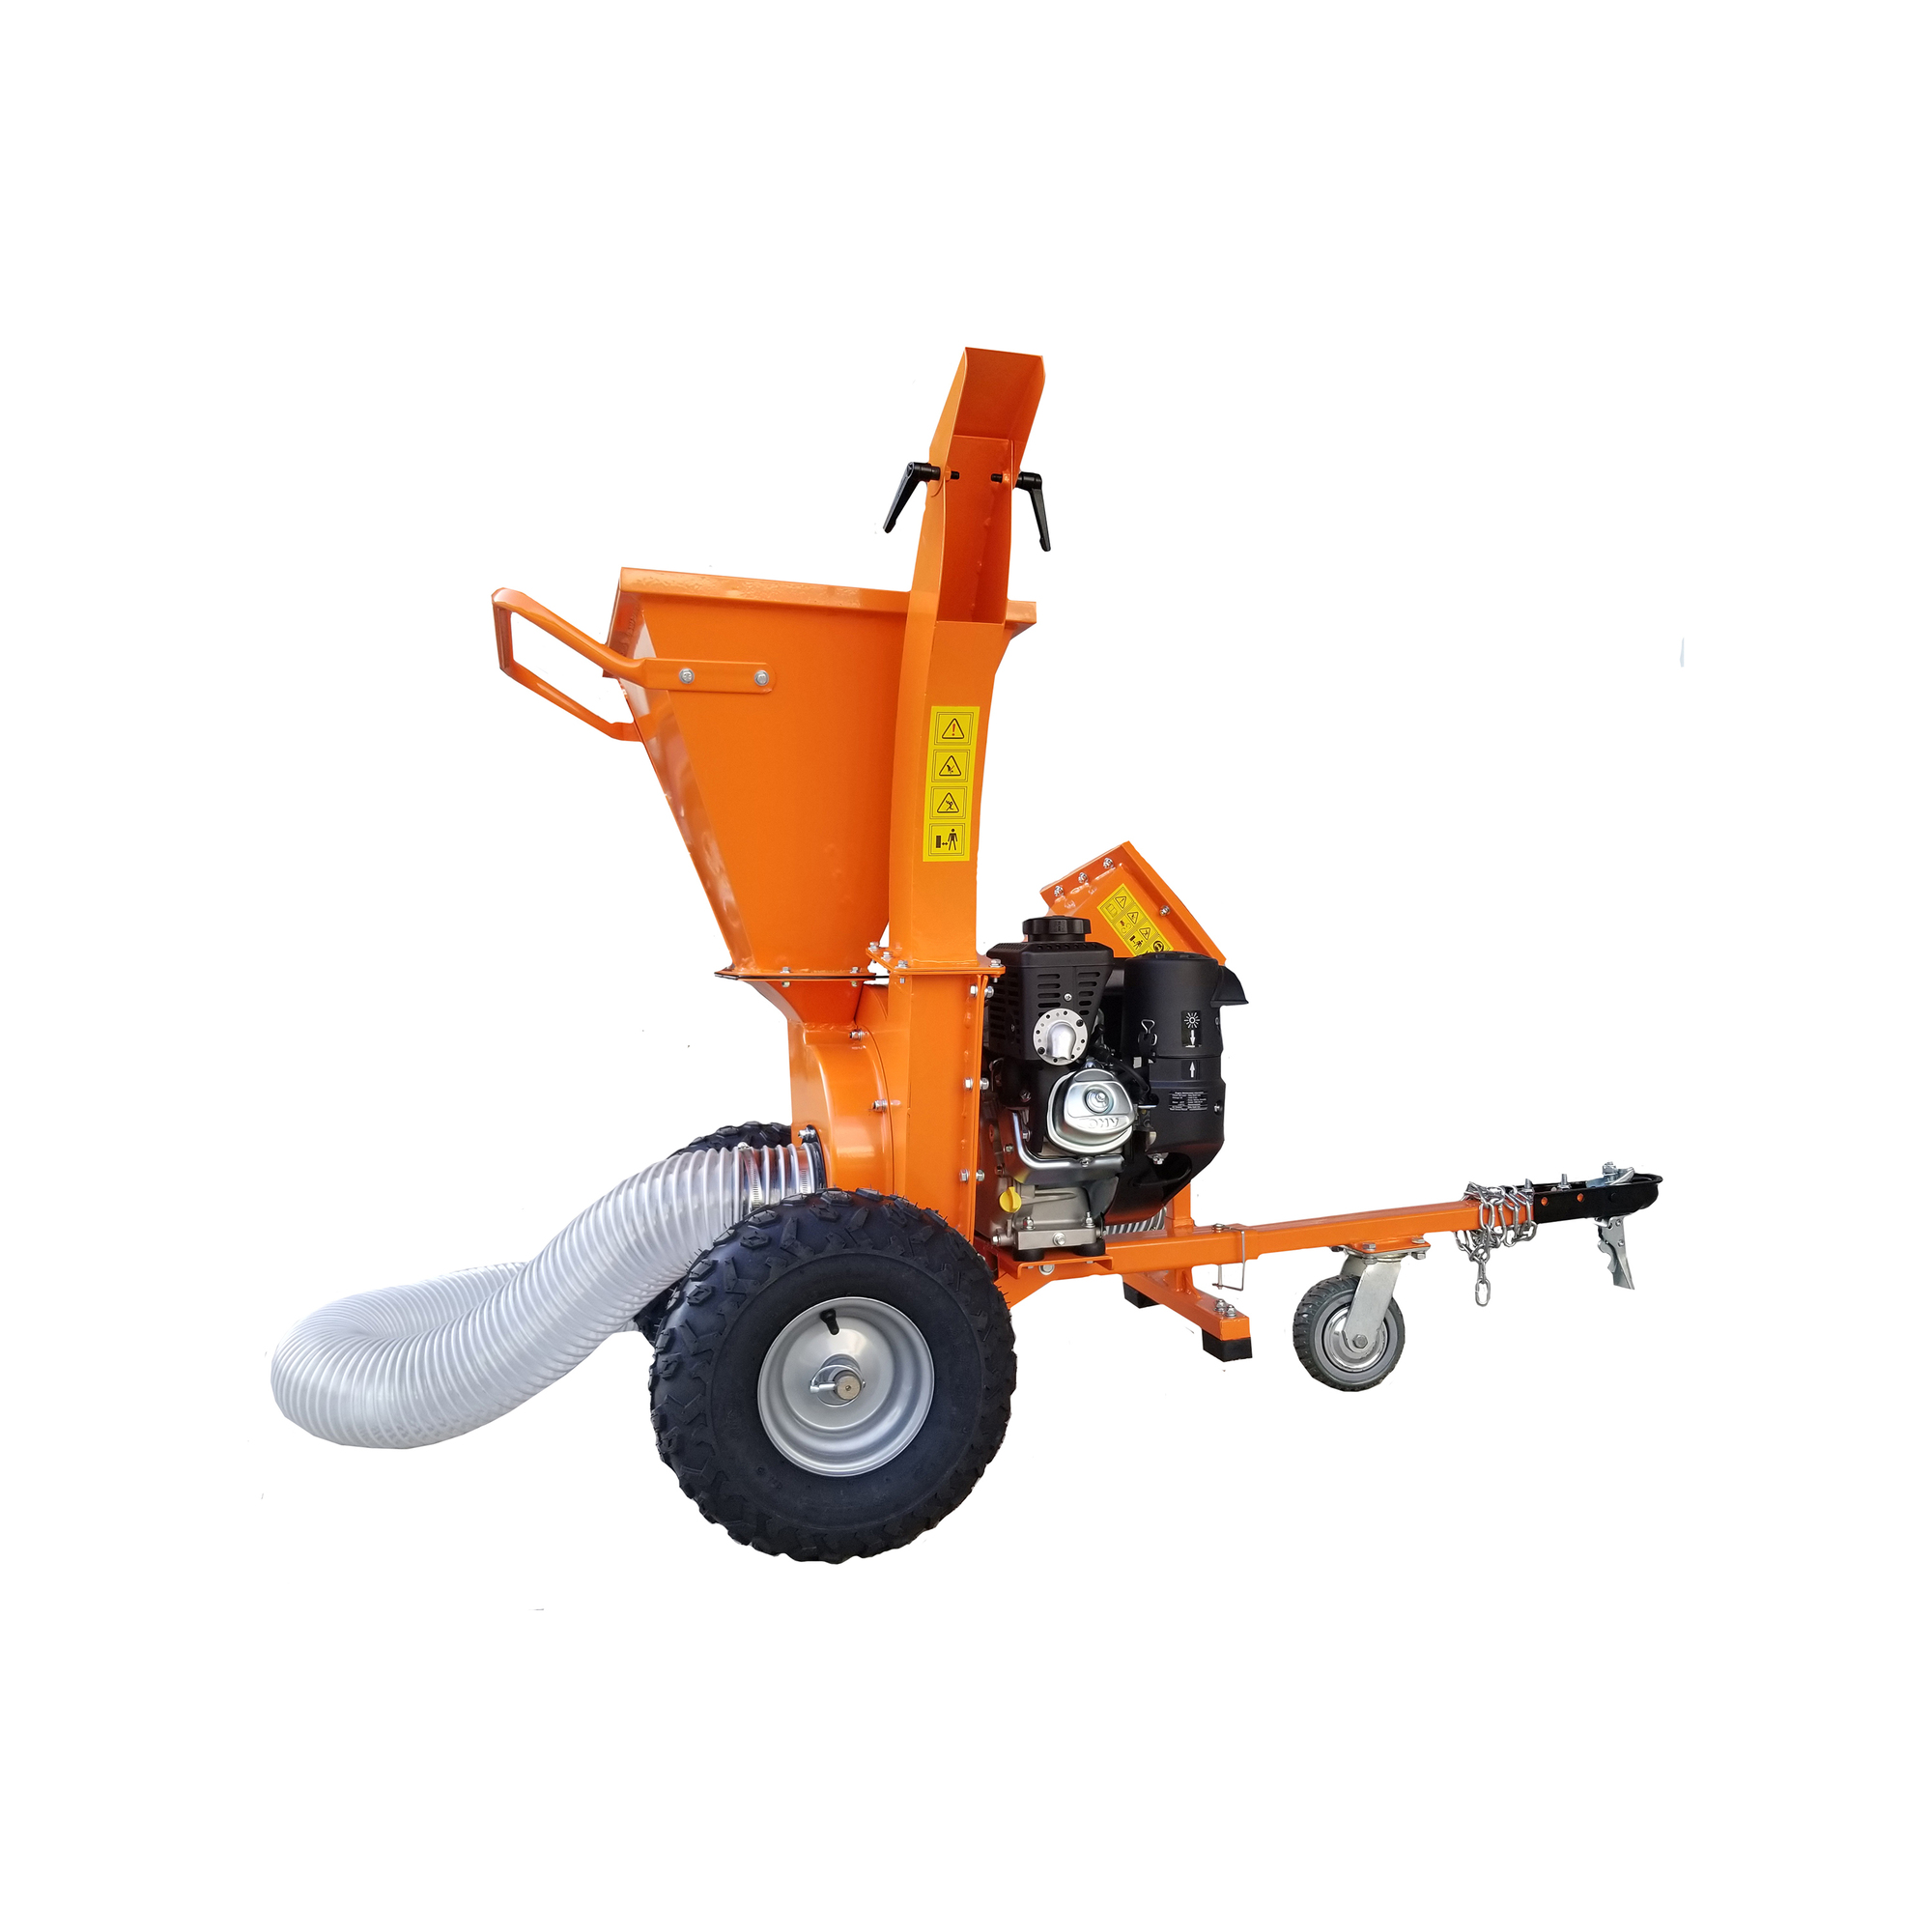 DK2 Power Commercial Chipper Shredder Vacuum, for ATV, Engine Displacement 208 cc, 7 HP 3 Inch Cutting, Model OPC503V